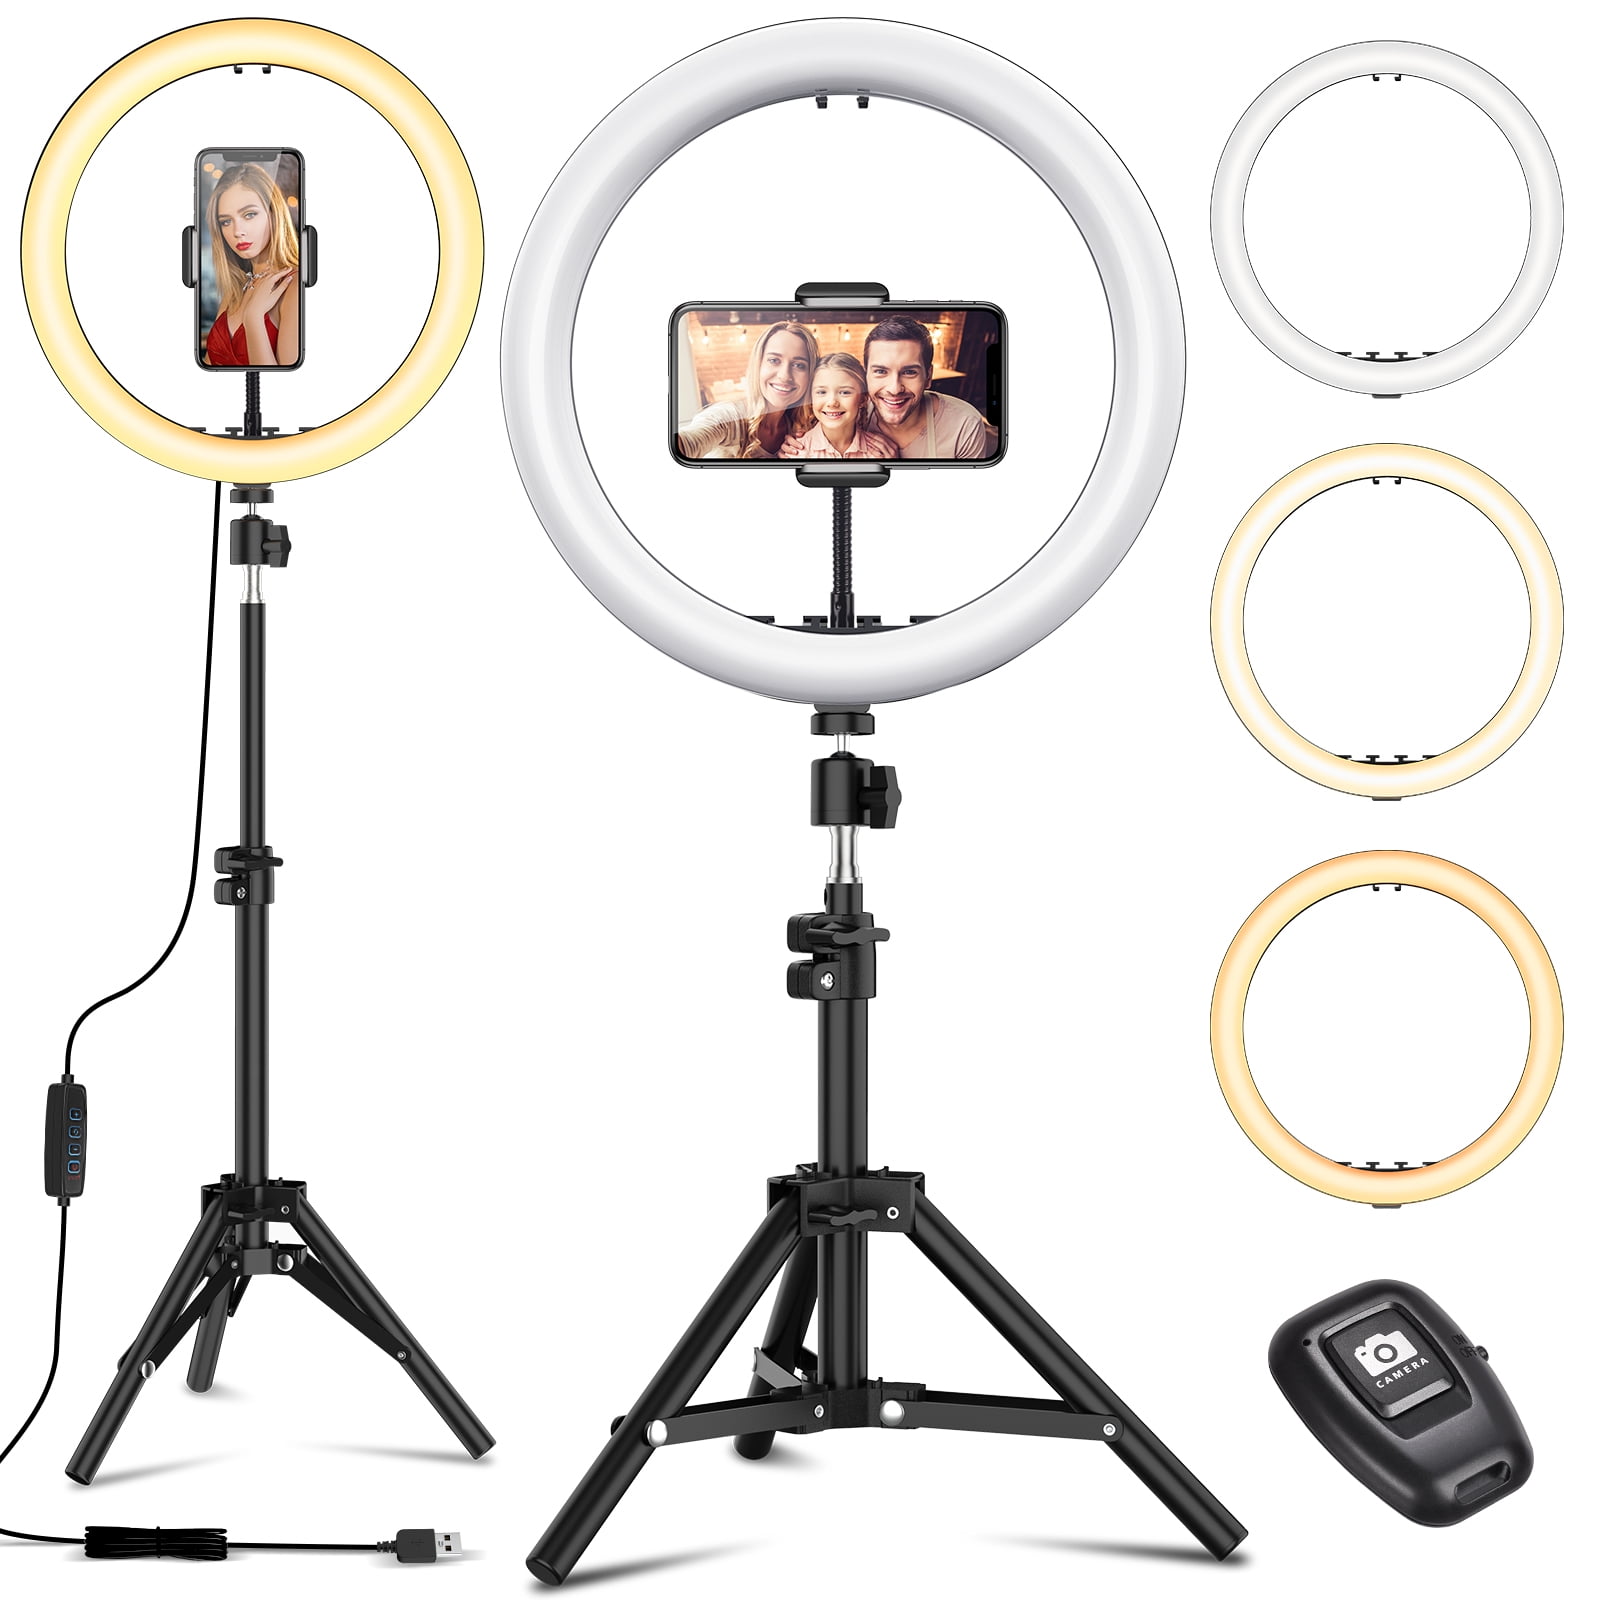 Dimmable Led Beauty Ringlight for YouTube TikTok/Photography Compatible for iPhone and Android Phone 6 Selfie LEd Ring Light with Tripod Stand & Phone Holder for Live Stream/Makeup/Vlogging Video 